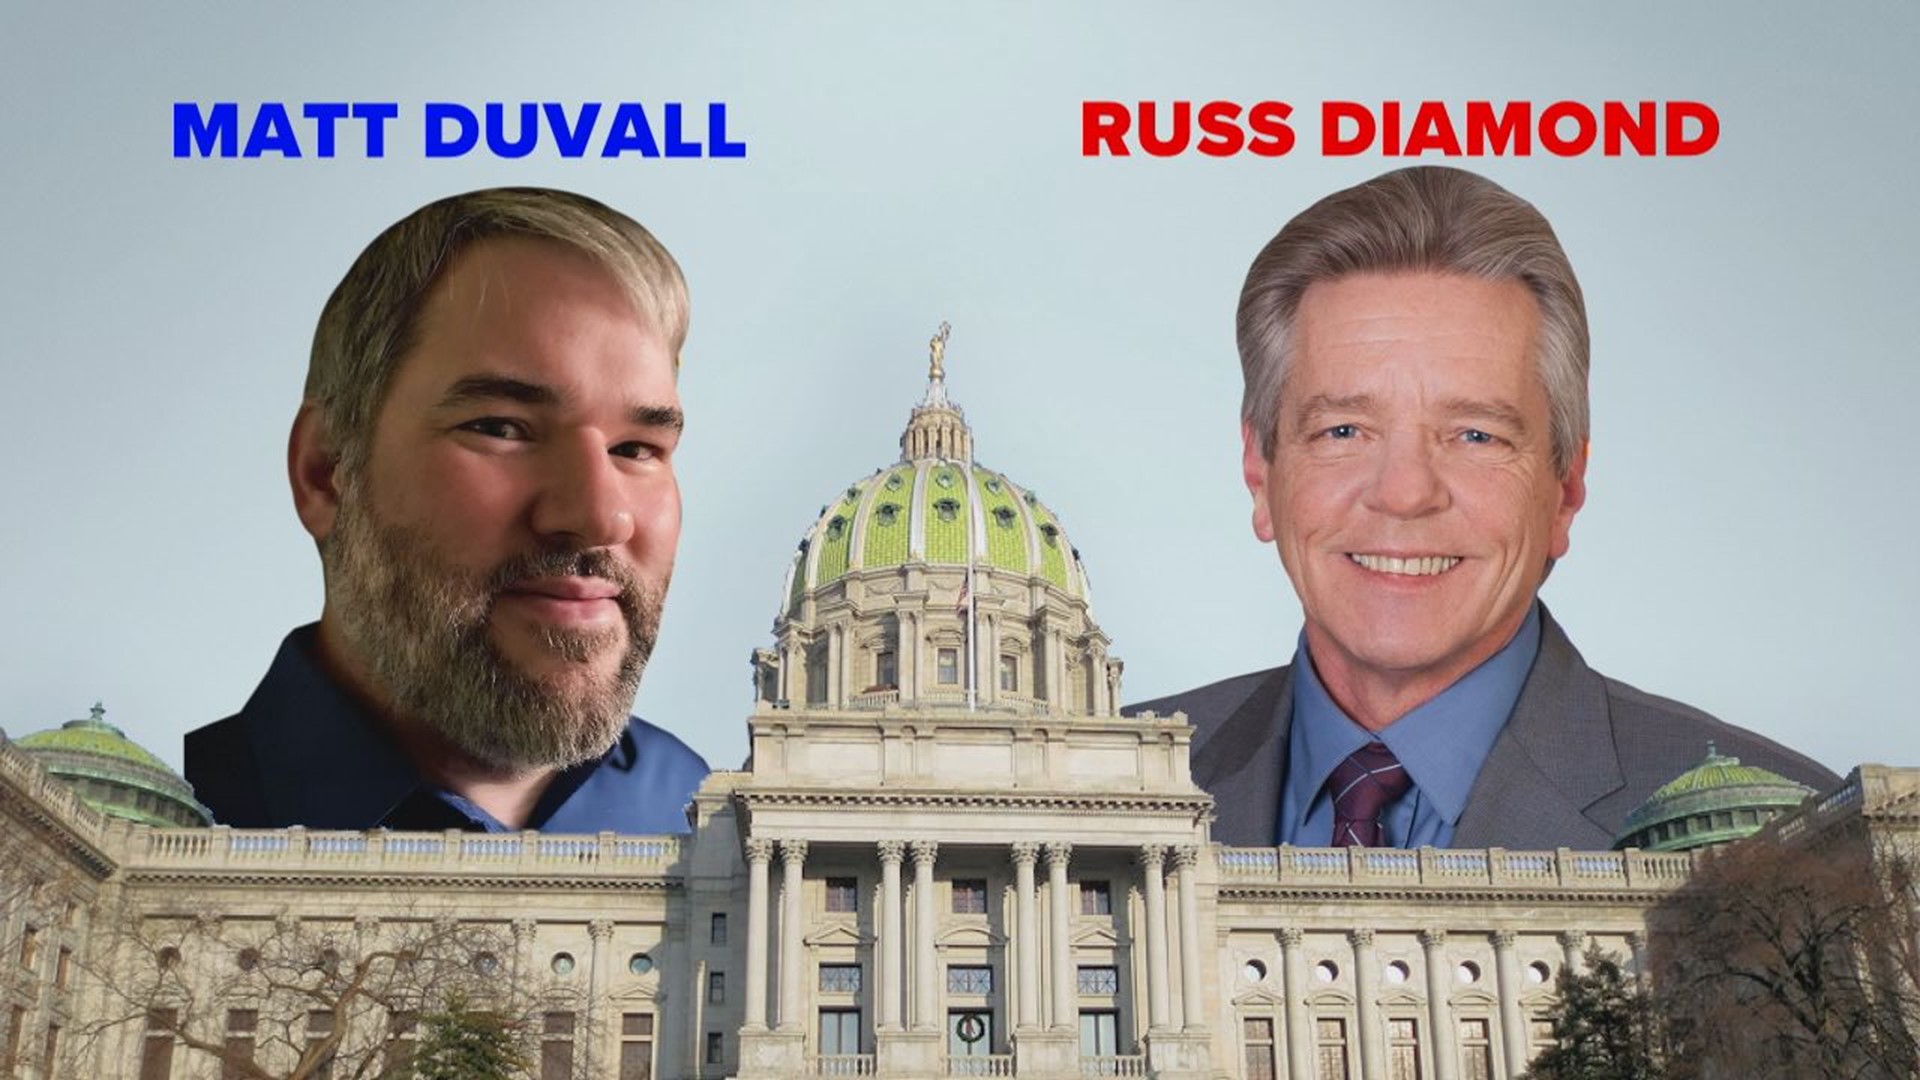 Diamond, one of Governor Wolf's harshest critics, is seeking a fourth term against Annville resident Duvall.